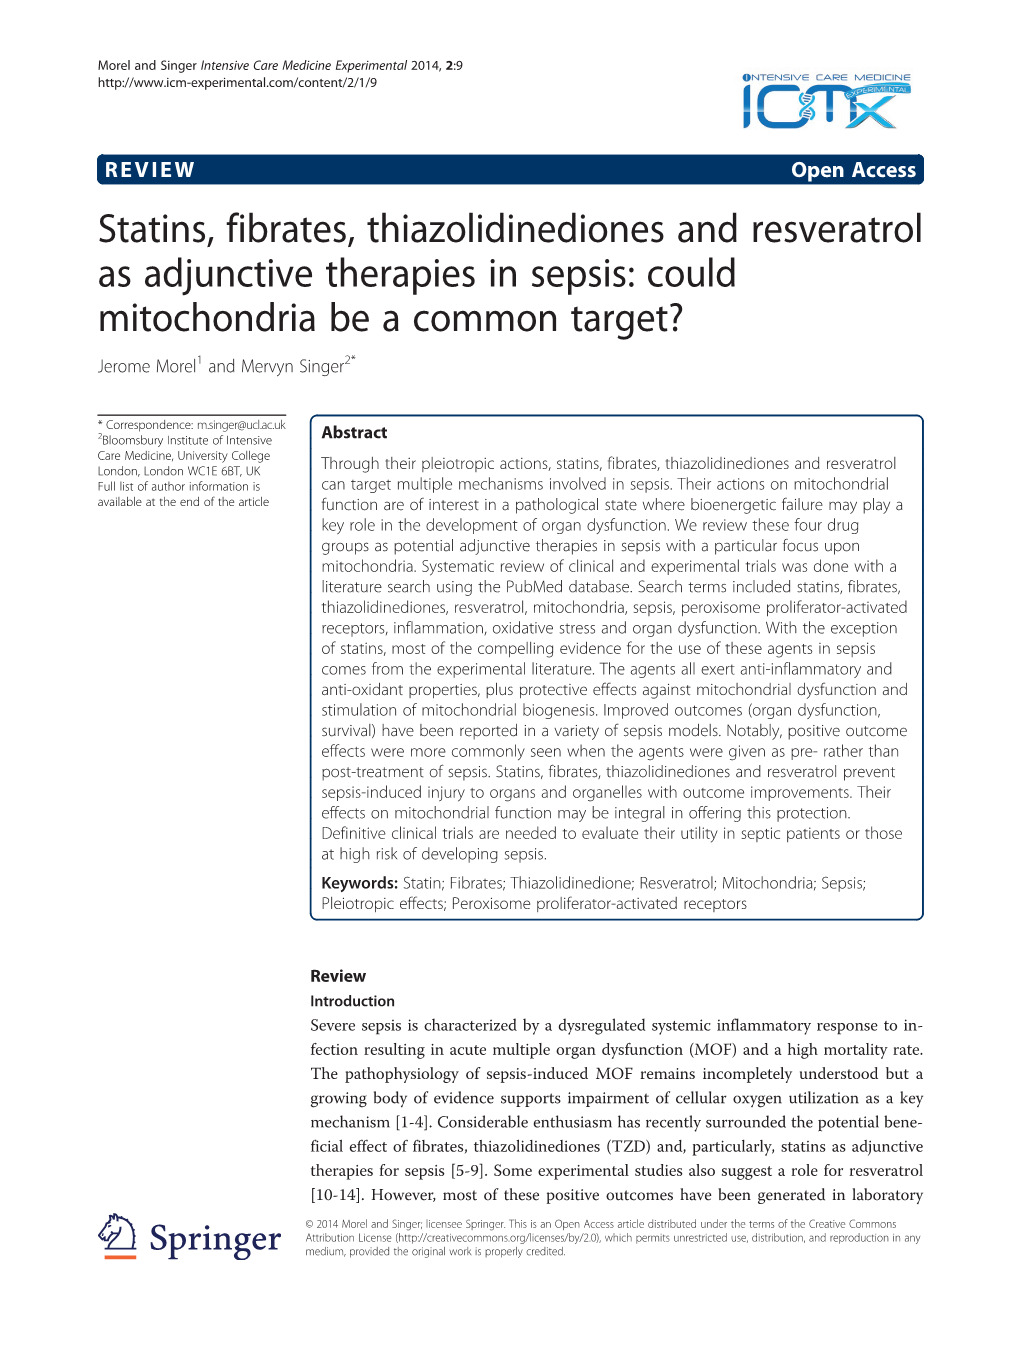 Statins, Fibrates, Thiazolidinediones and Resveratrol As Adjunctive Therapies in Sepsis: Could Mitochondria Be a Common Target? Jerome Morel1 and Mervyn Singer2*